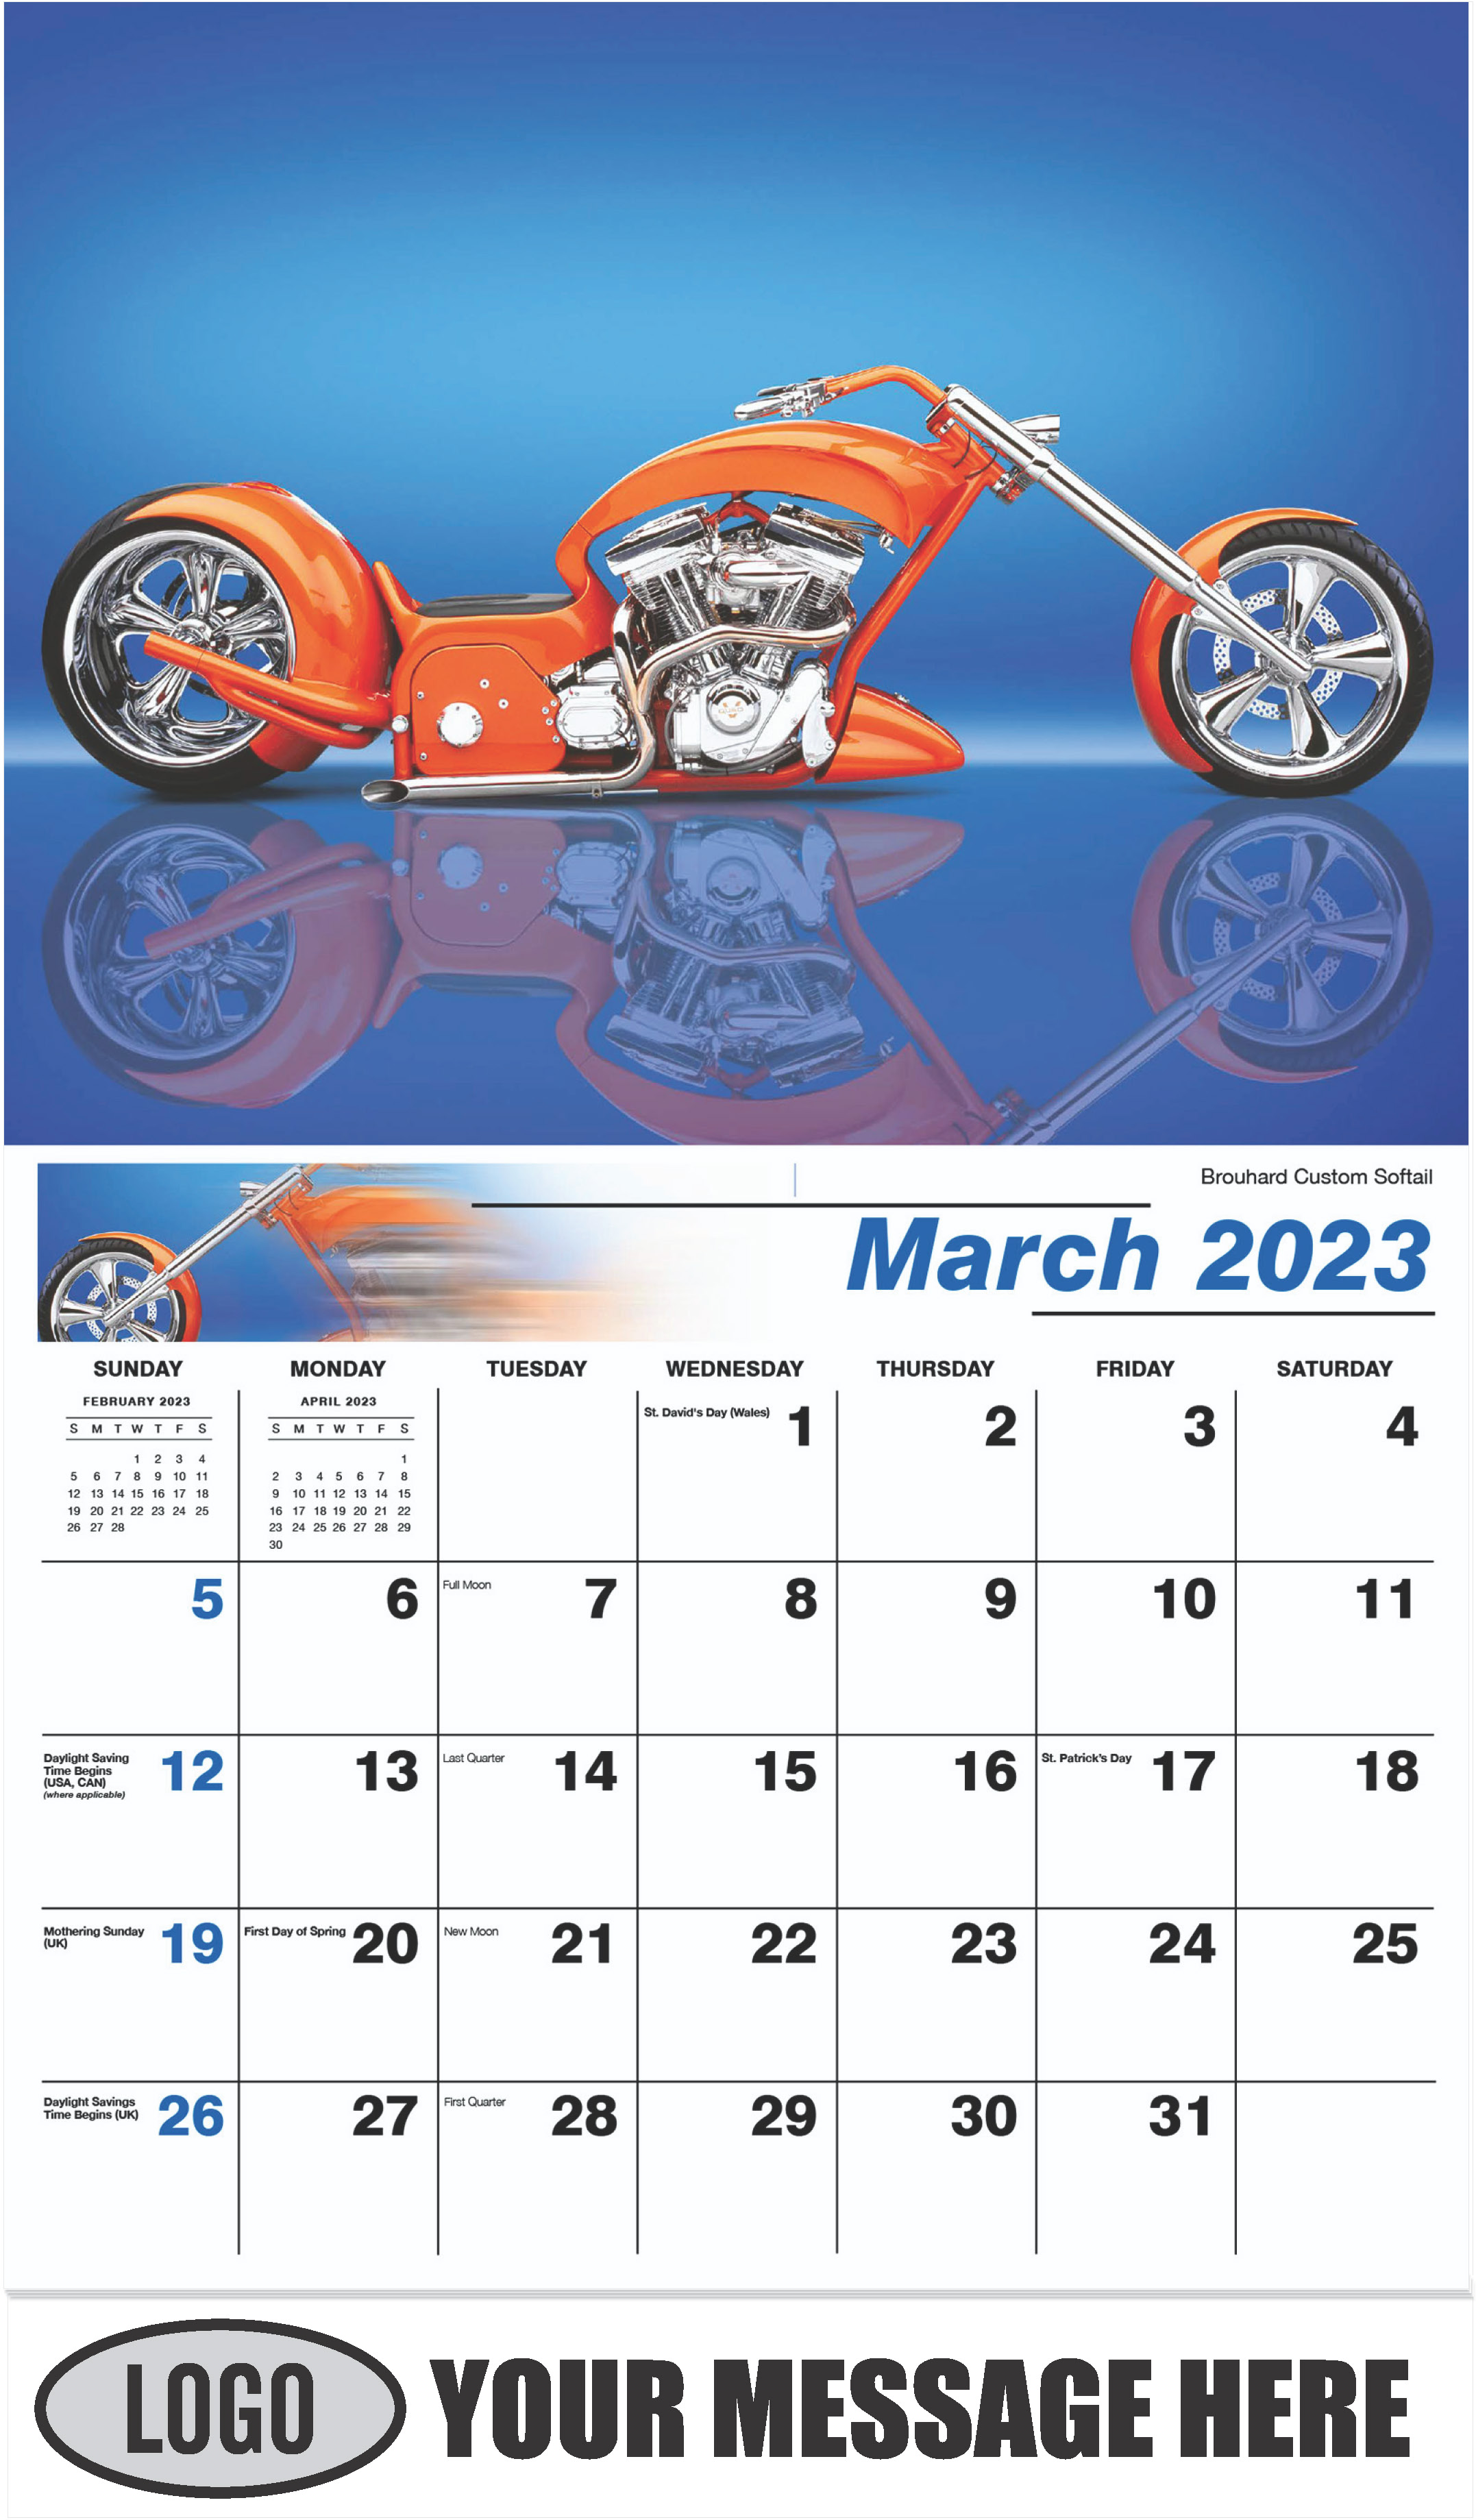 Brouhard Custom Softail - March - Motorcycle Mania 2023 Promotional Calendar